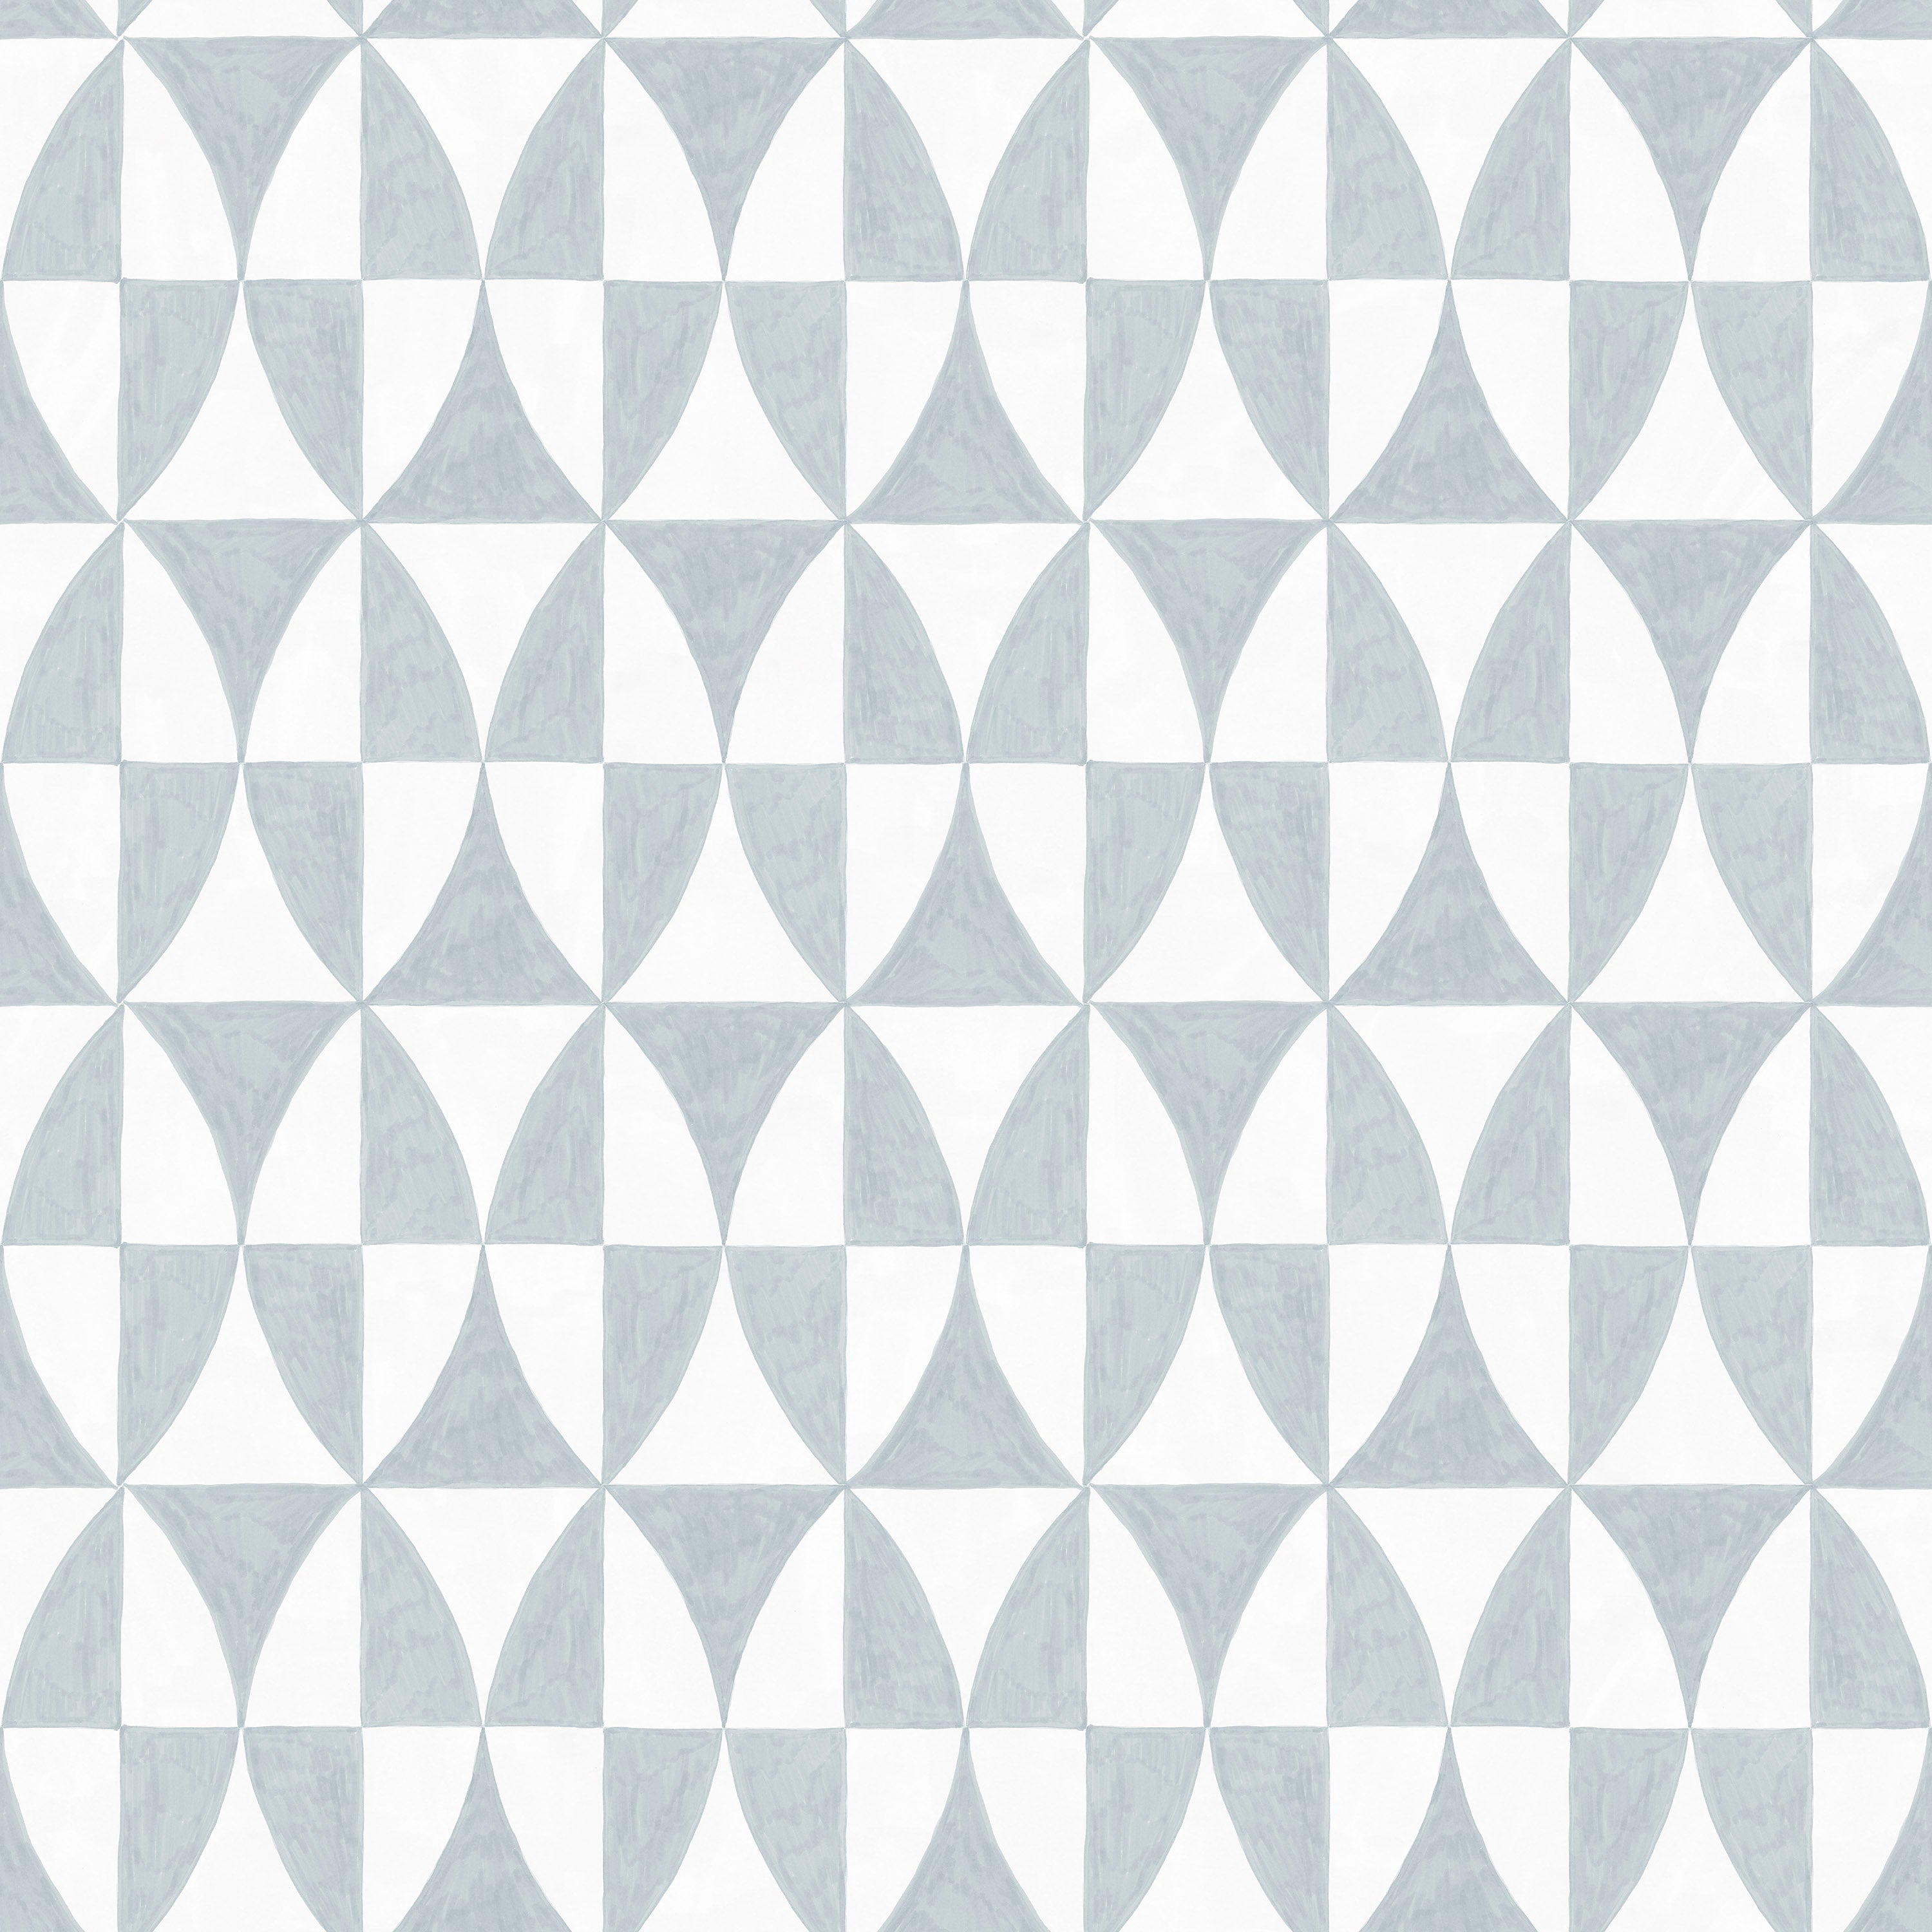 Detail of fabric in a curvilinear grid print in light blue on a white field.